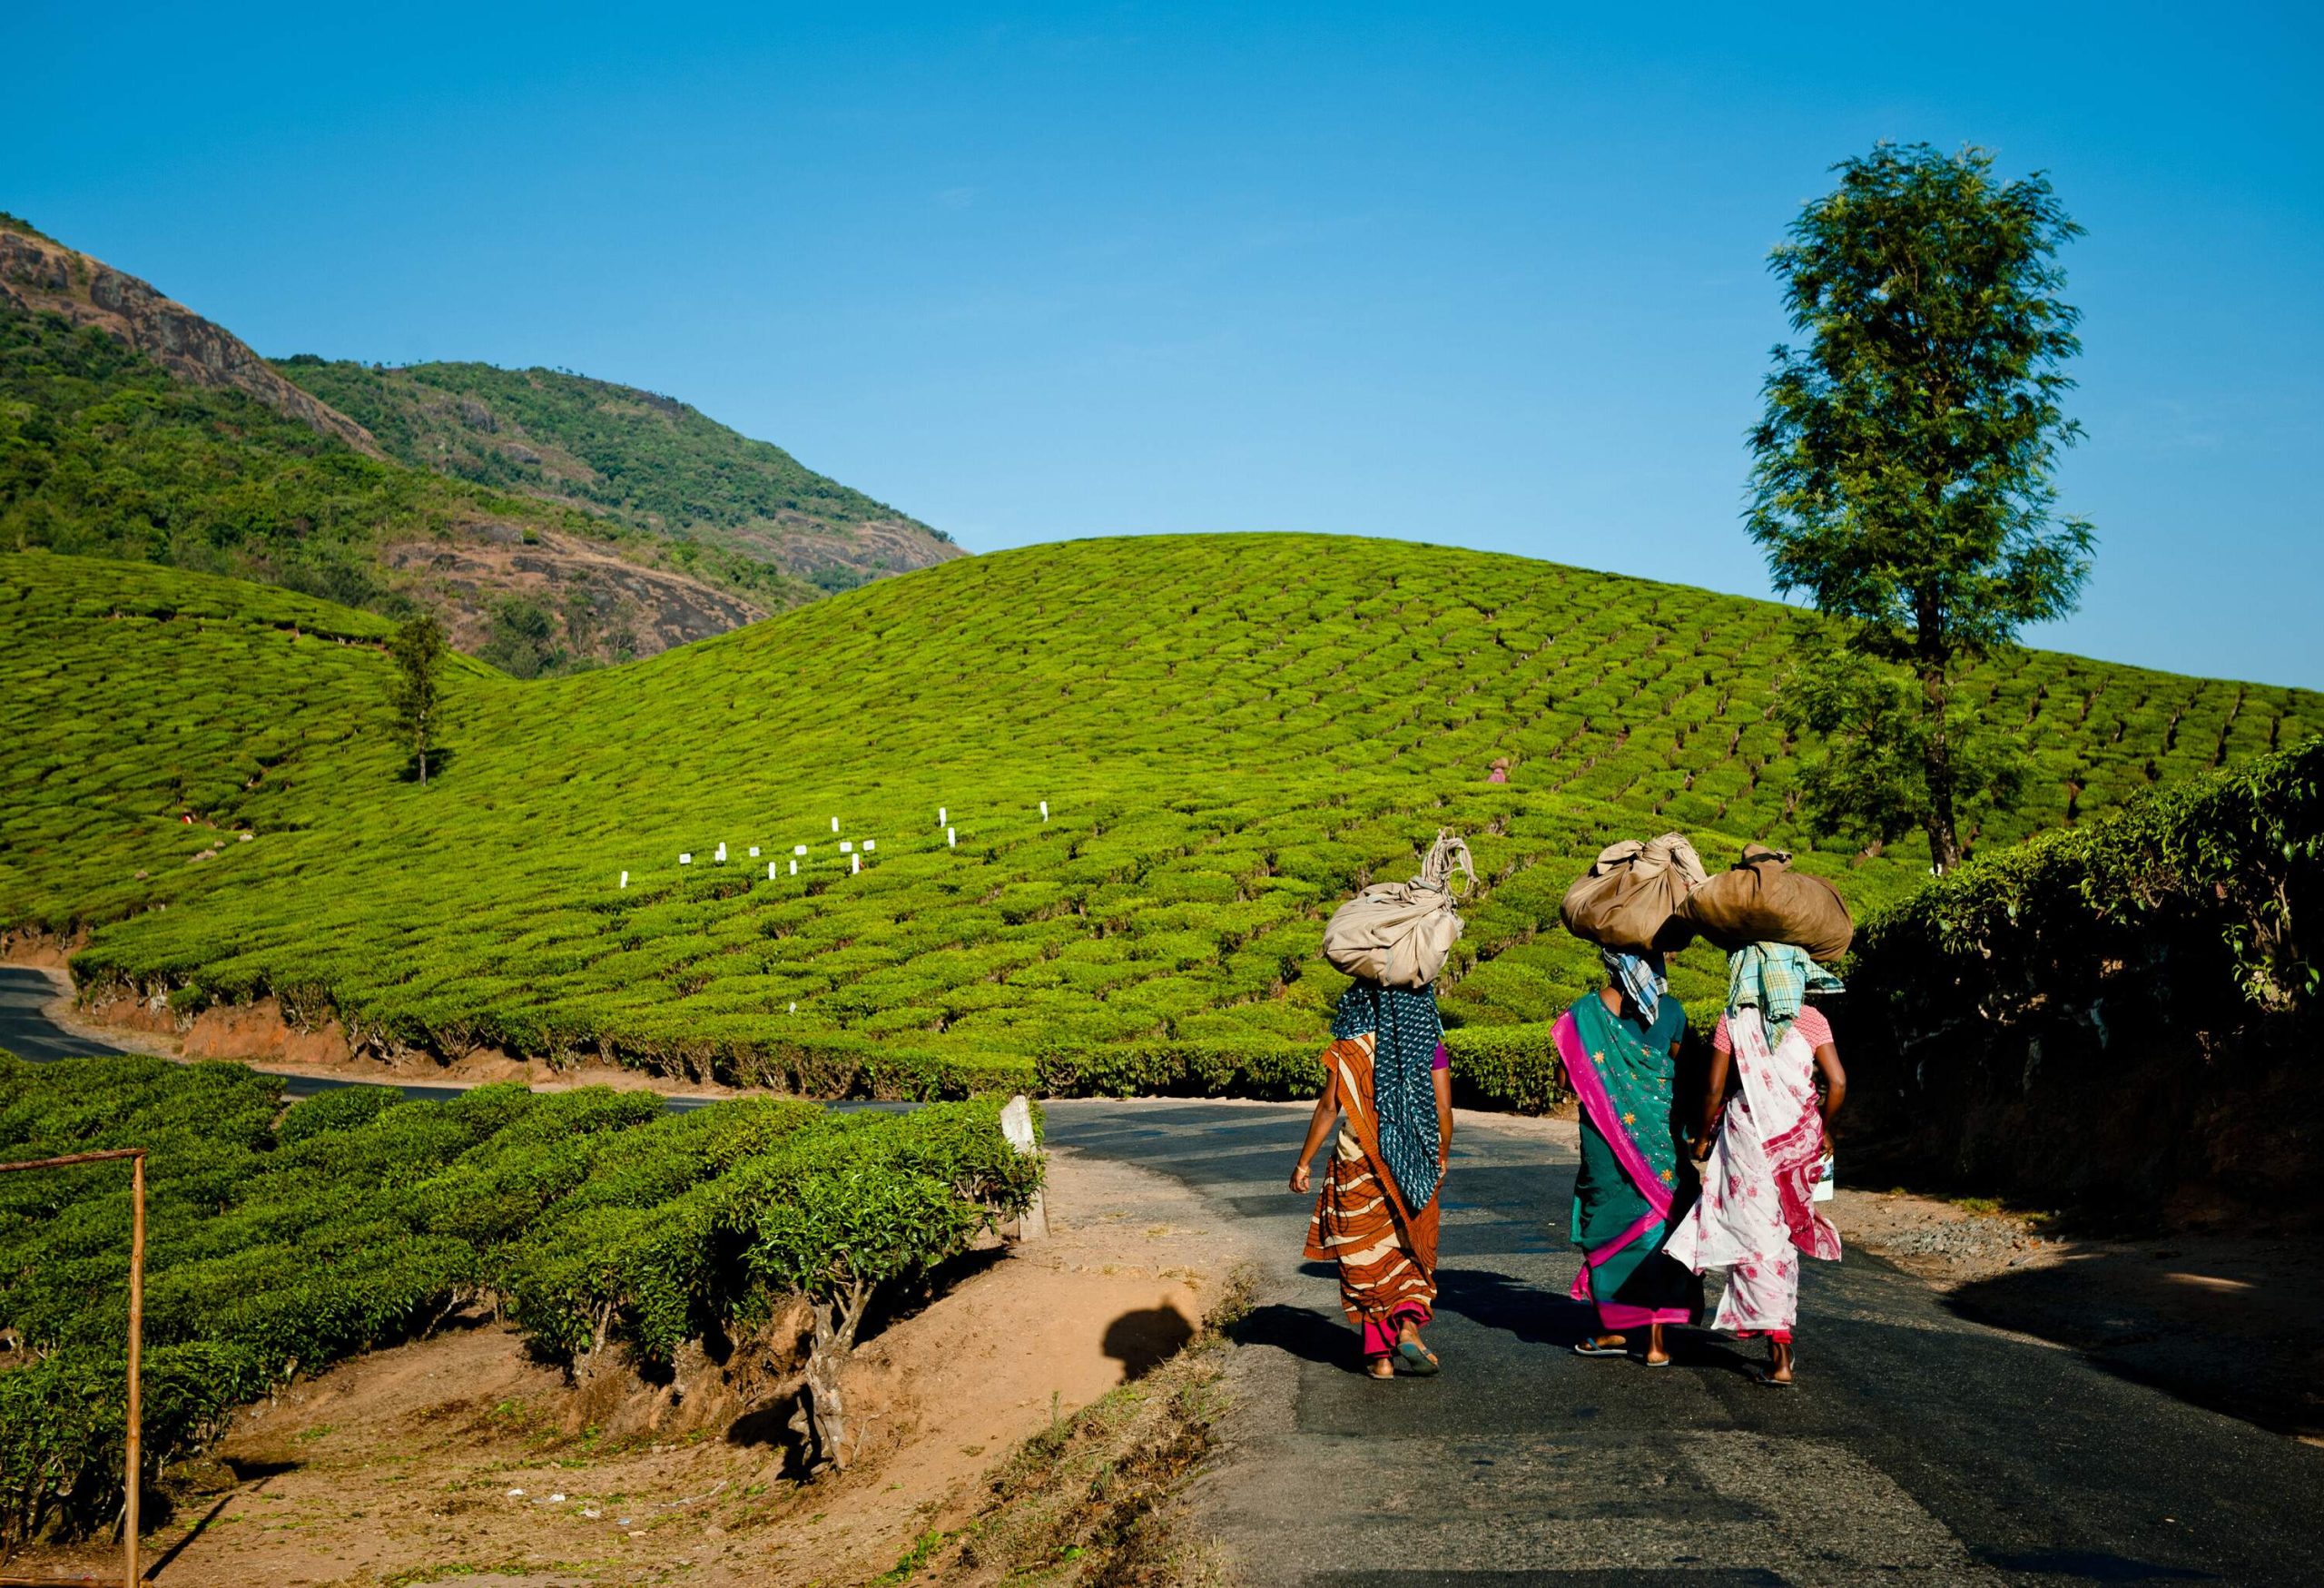 Three people in colourful traditional clothes carry packages on their head as they walk towards the verdant tea plantation on the hills.